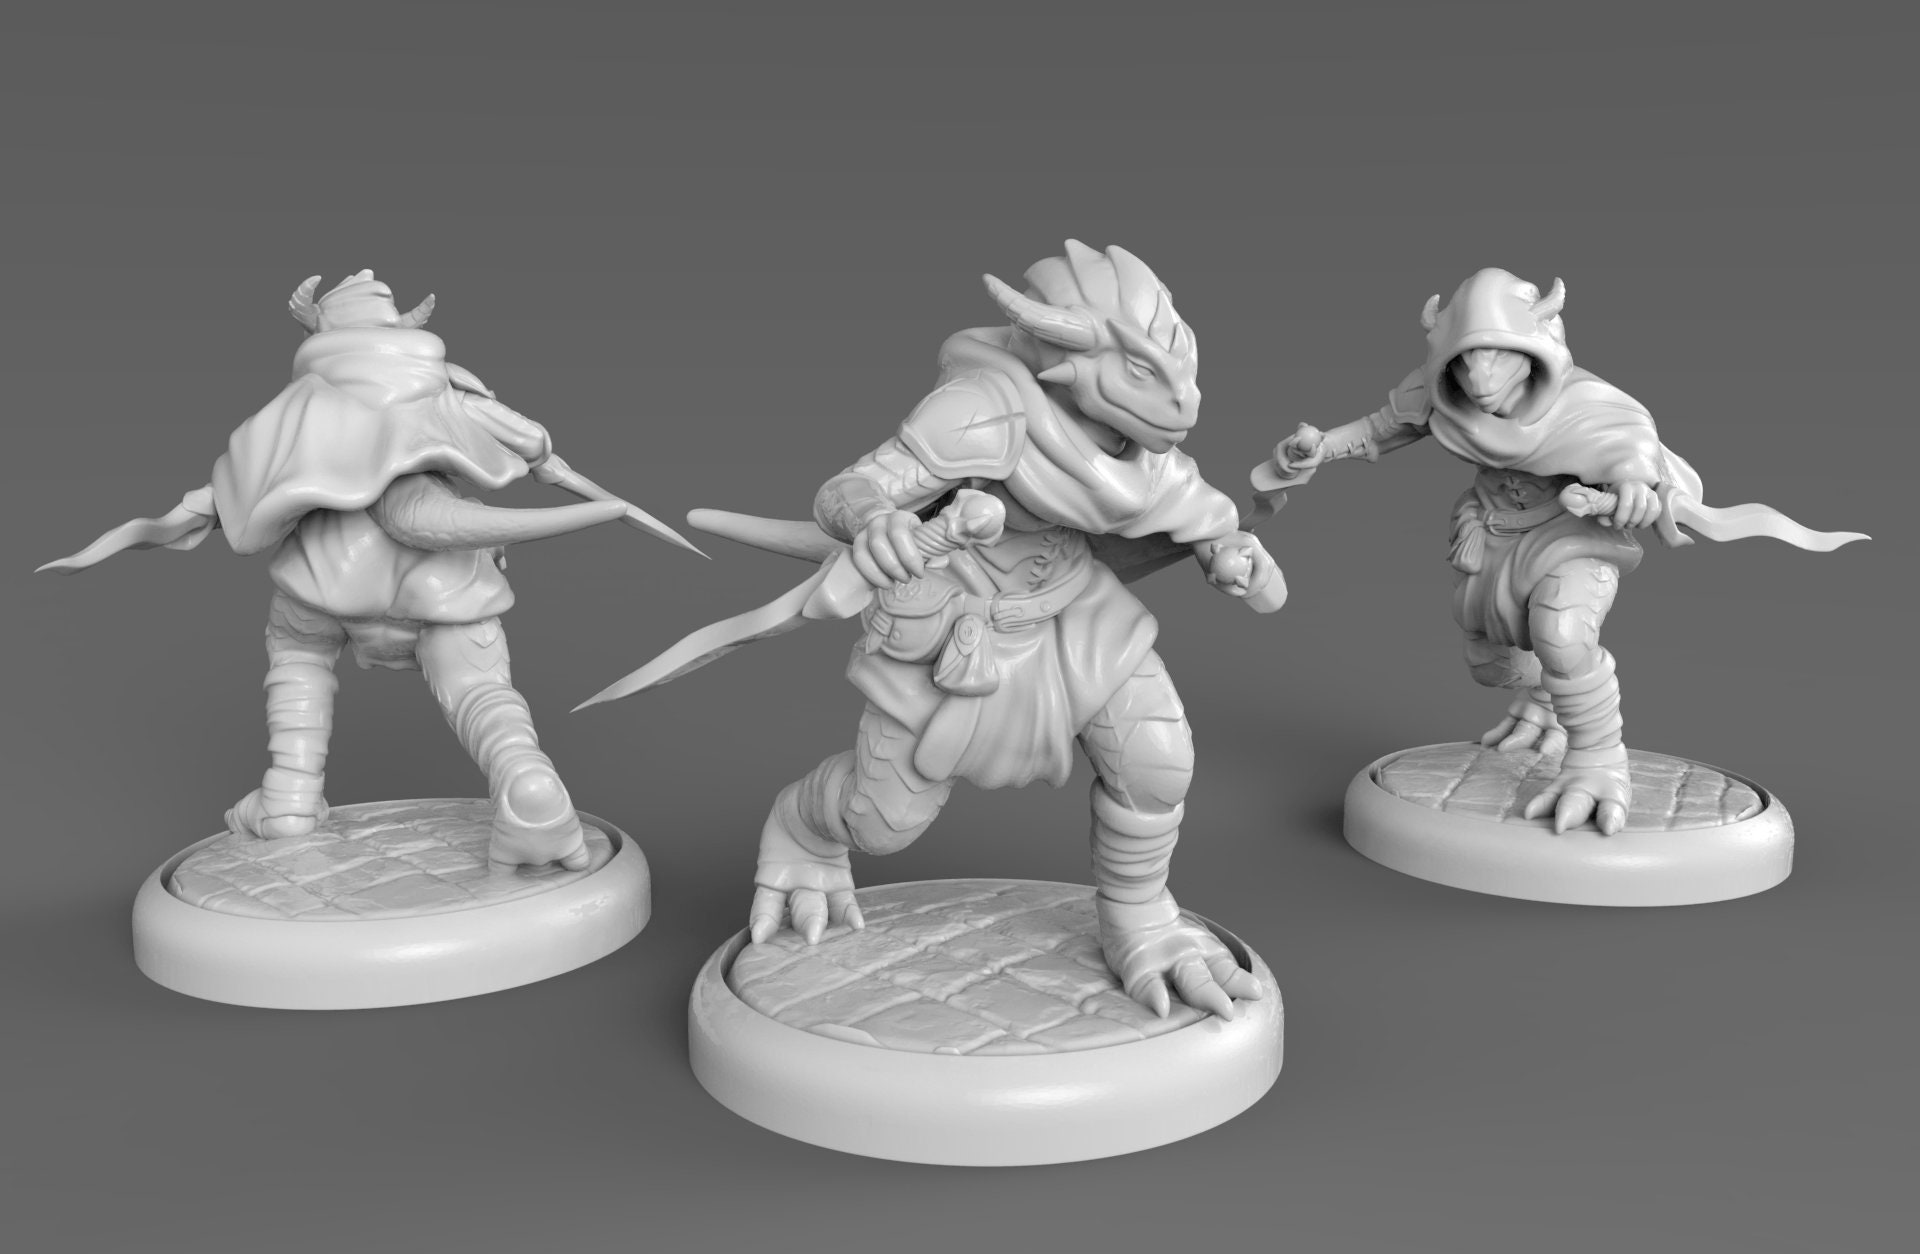 3D Printable Shadowrunners Miniatures Set 2 by Stonehaven Miniatures